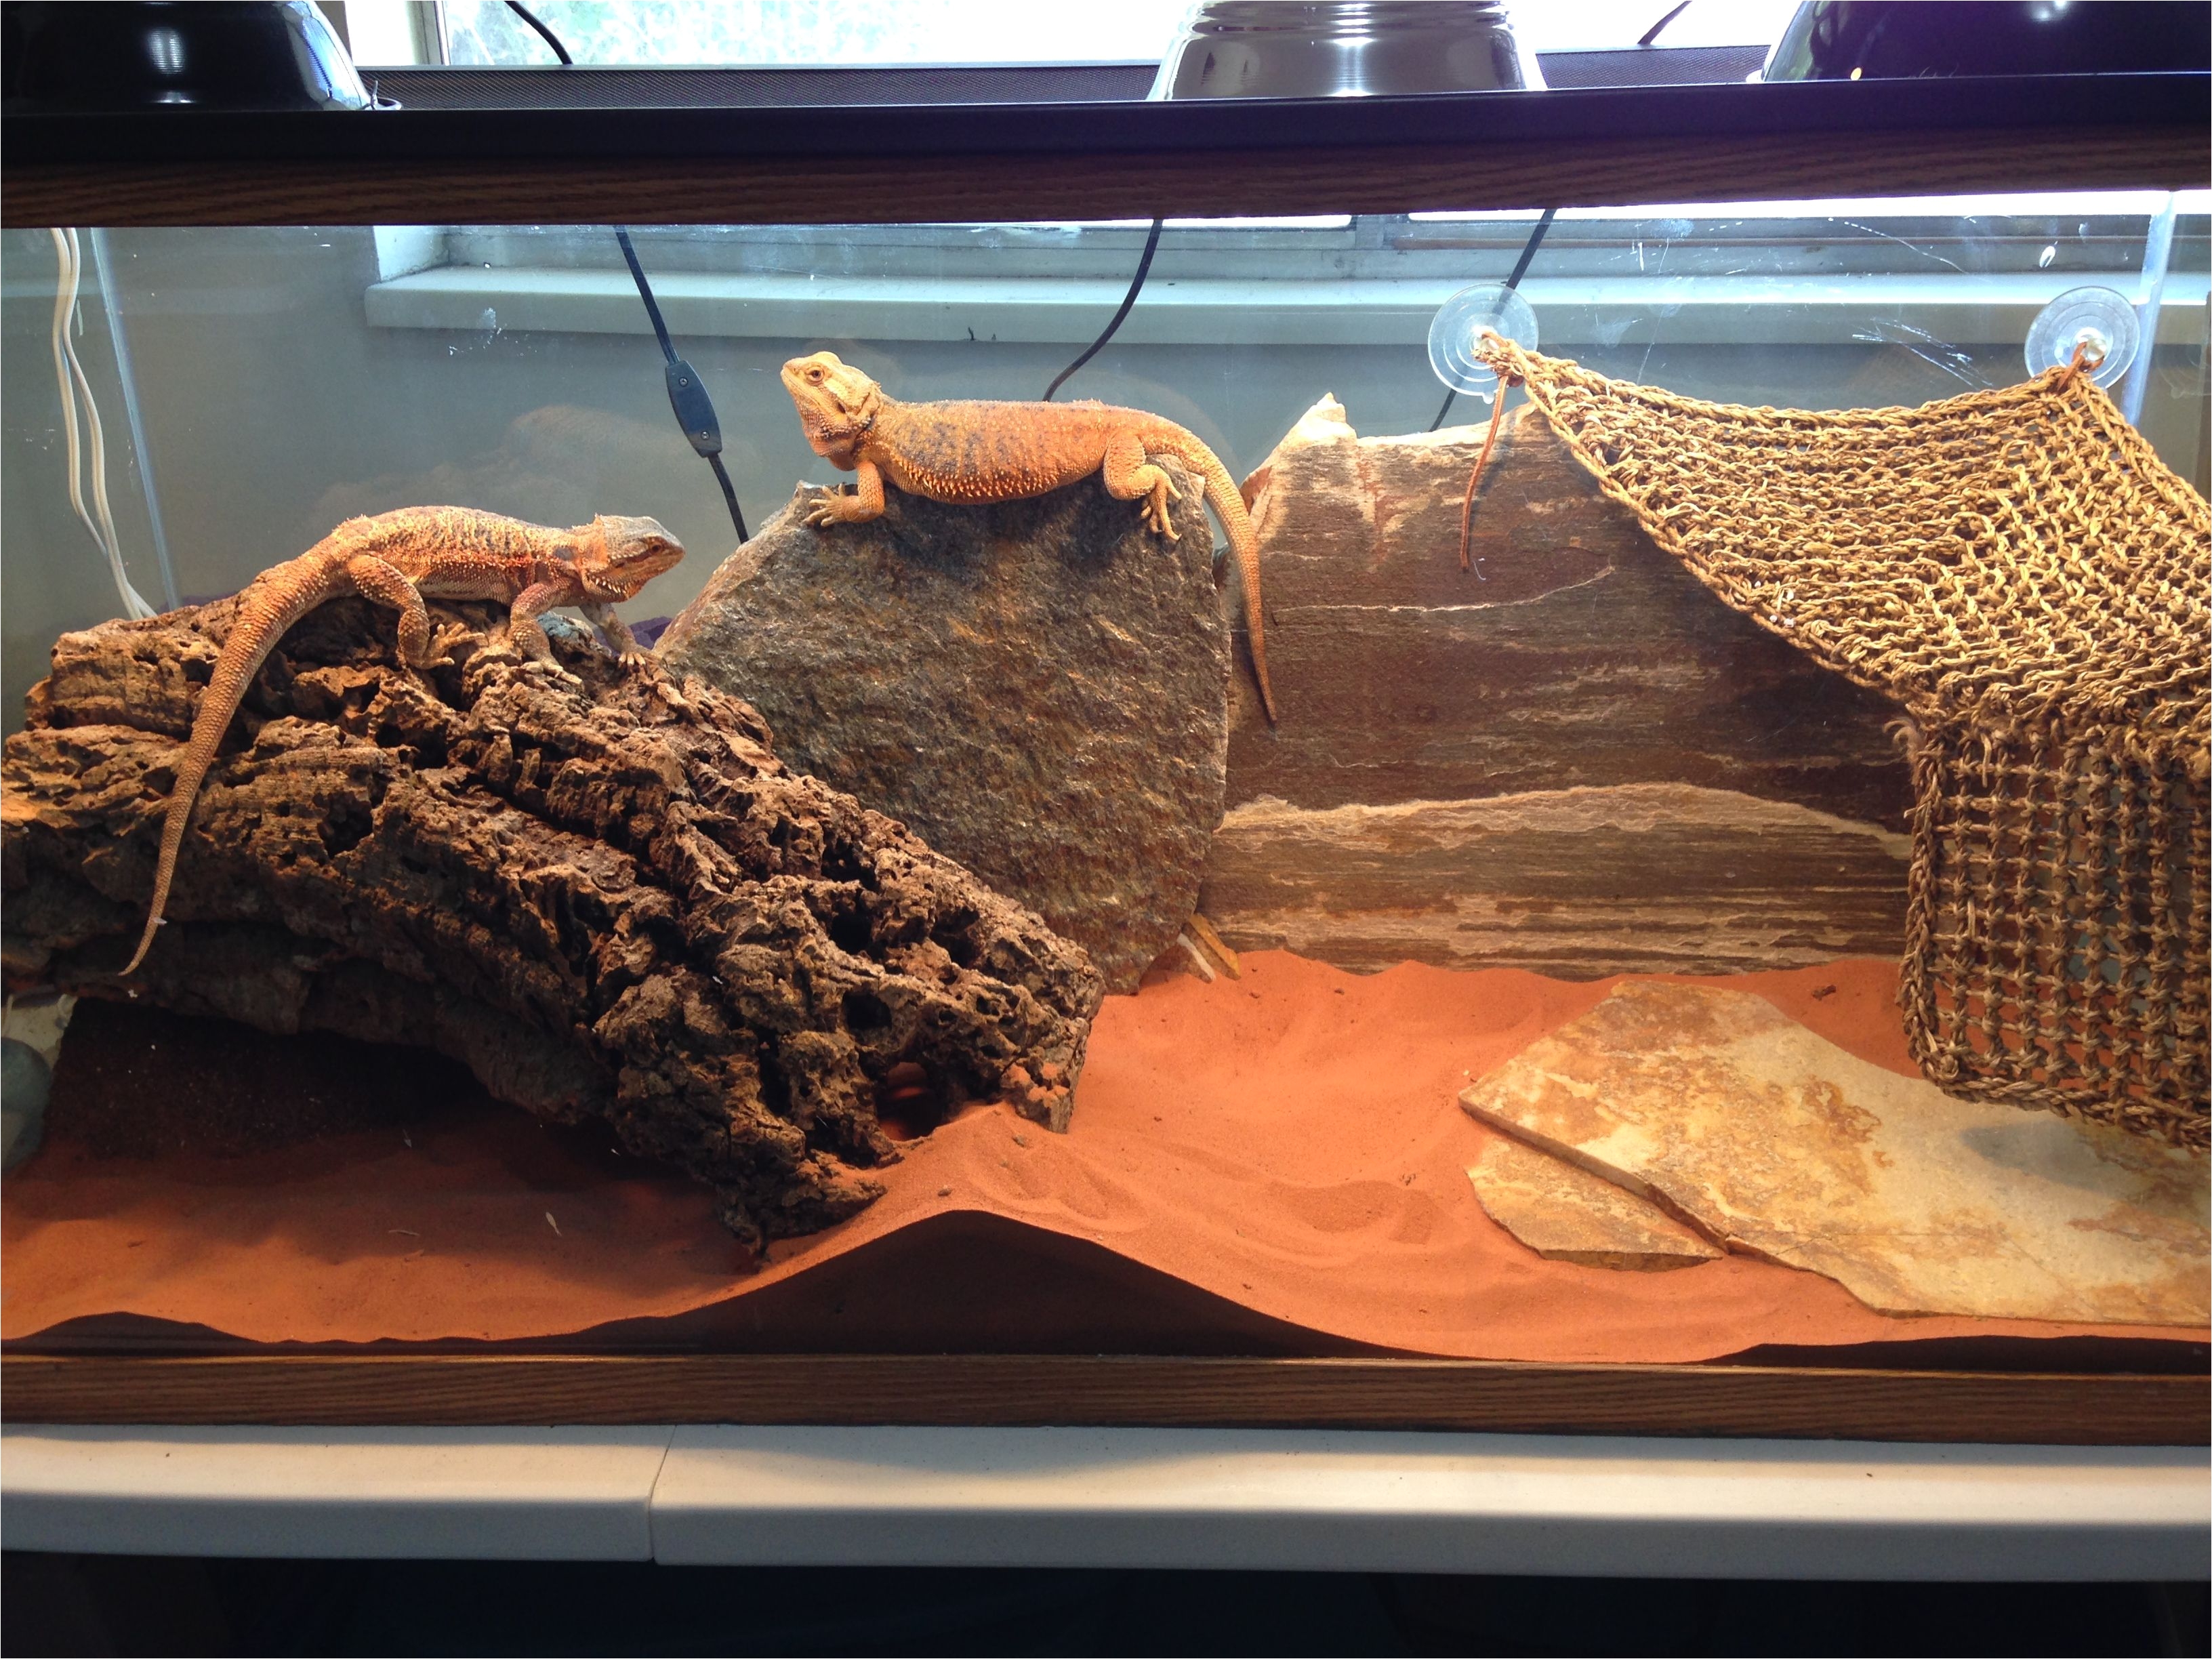 how to decorate your bearded dragon s terrarium and choose roommates the smart way